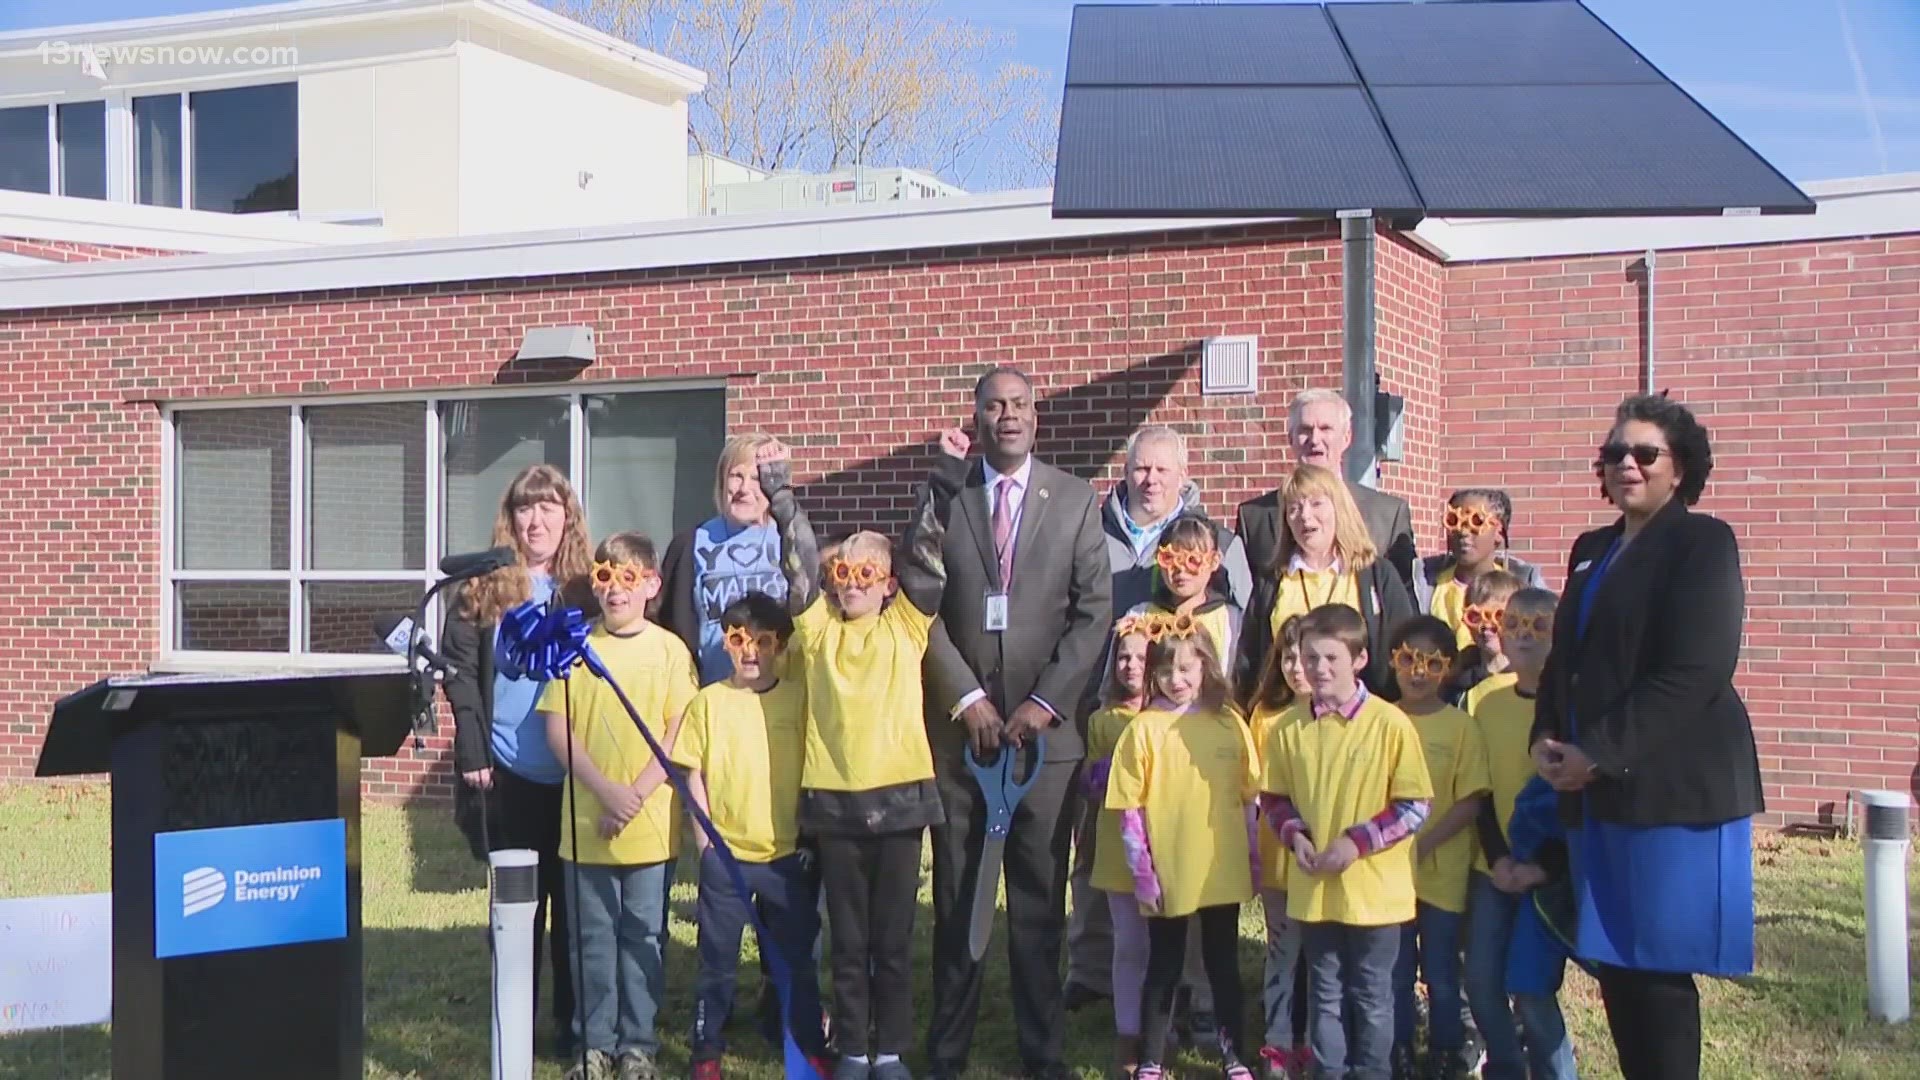 Abingdon Elementary is now part of Dominion Energy's "Solar for Students" program teaching students how sunlight is converted into electric power.